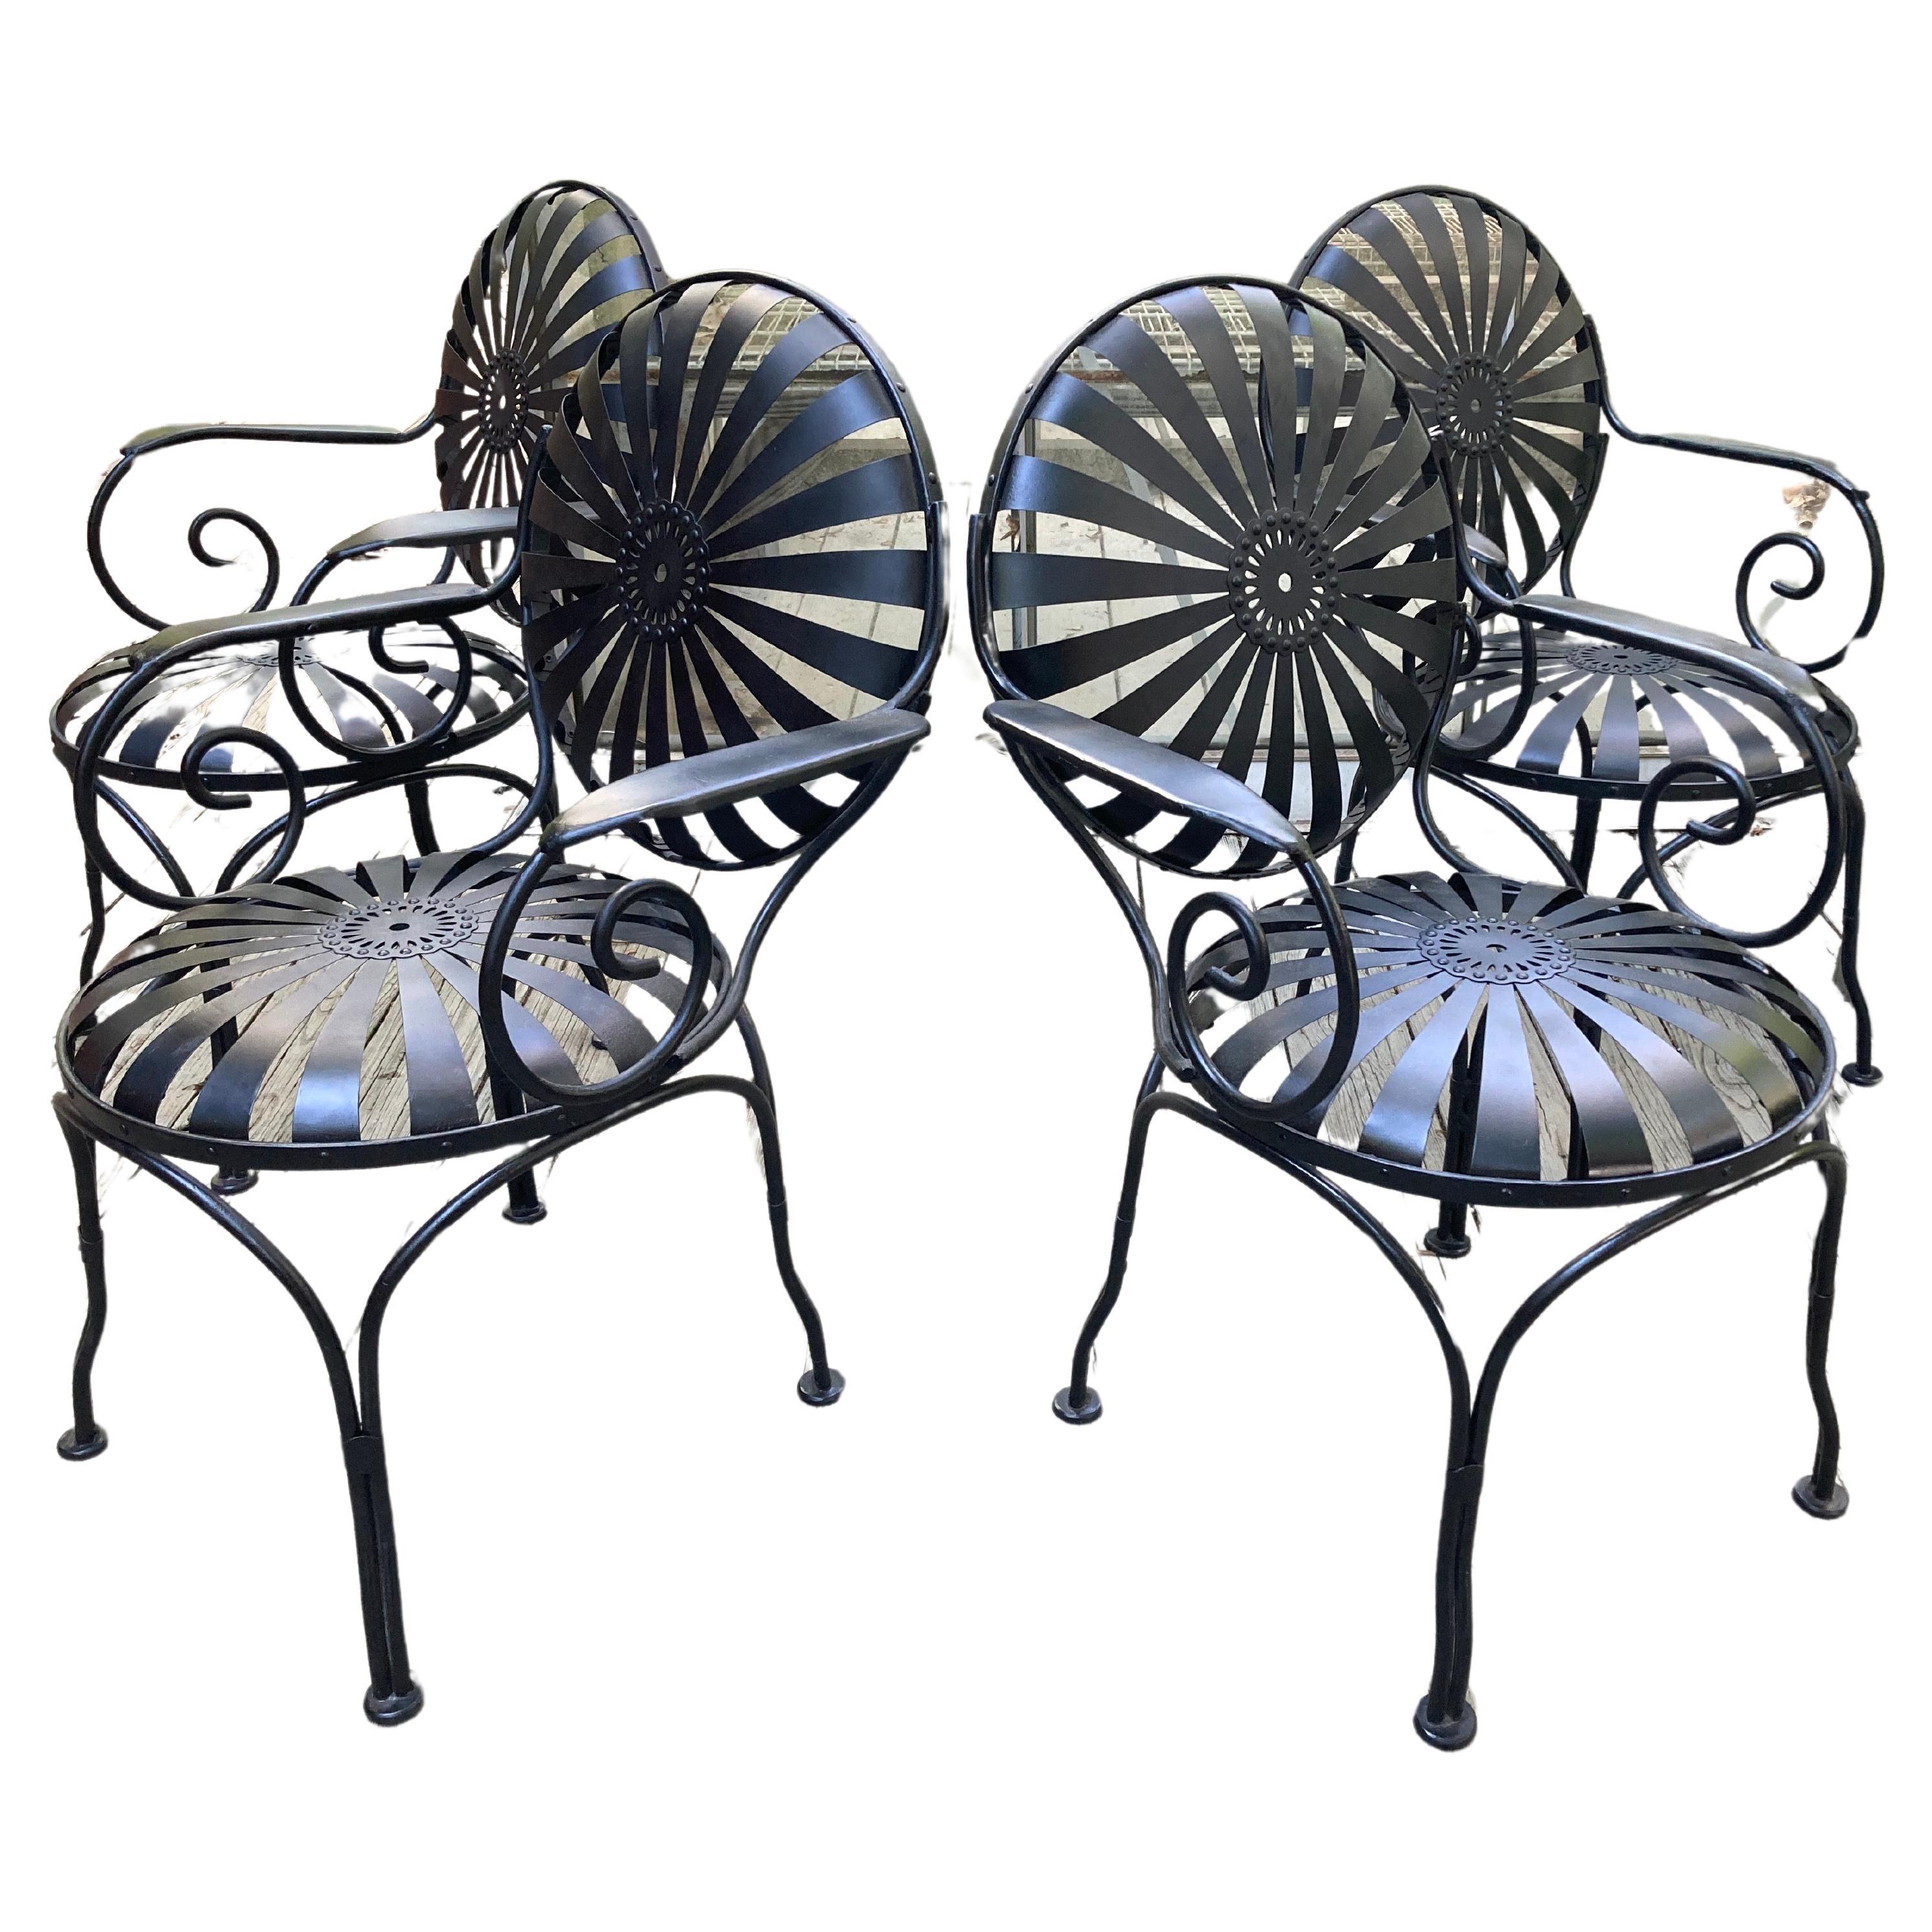 Francois Carre Black Garden Chairs - set of 4